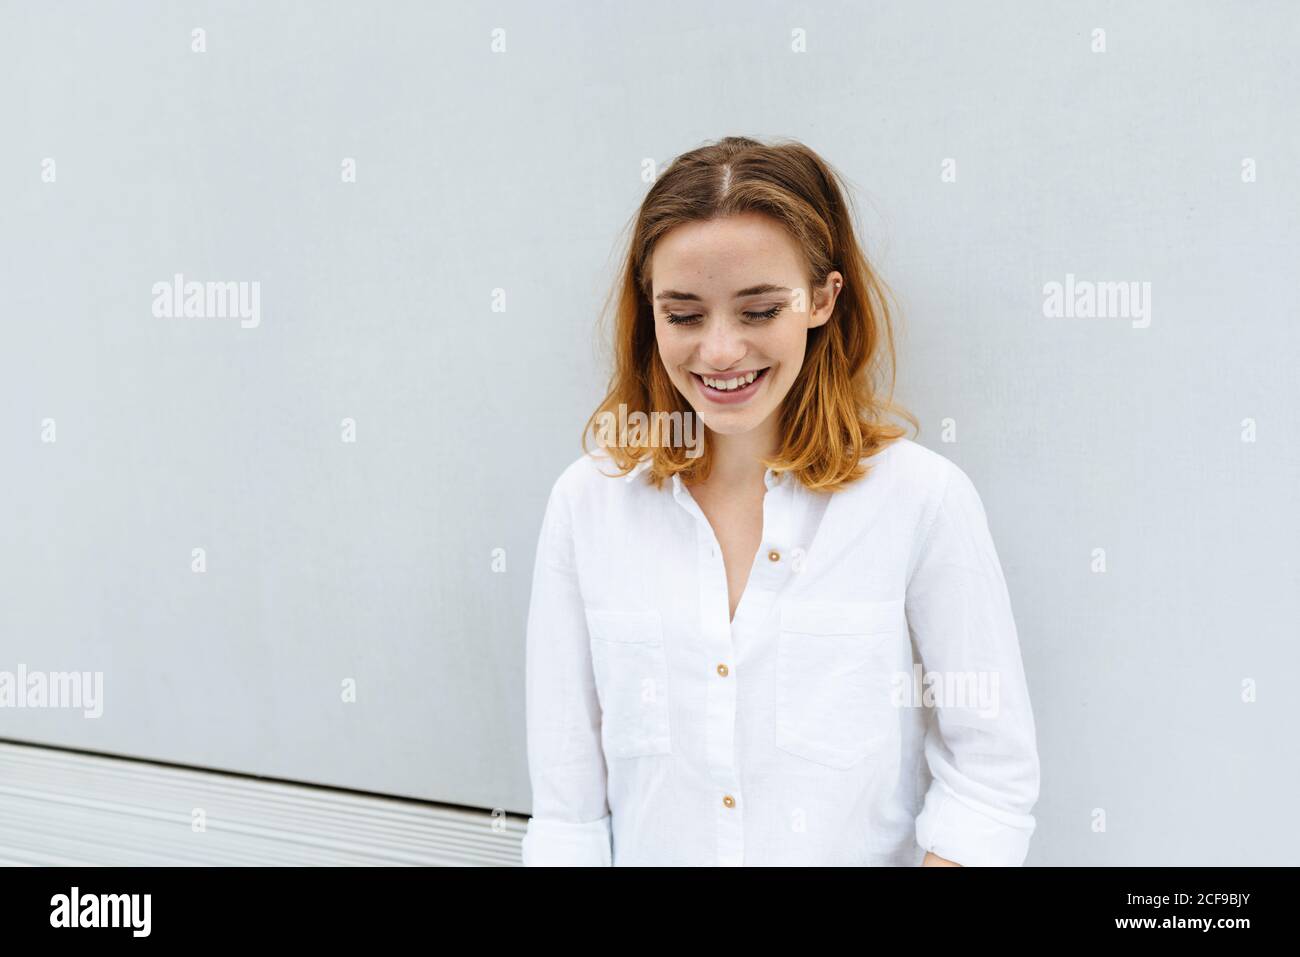 Young woman standing with downcast eyes and a wide friendly smile against a white wall with copyspace outdoors Stock Photo